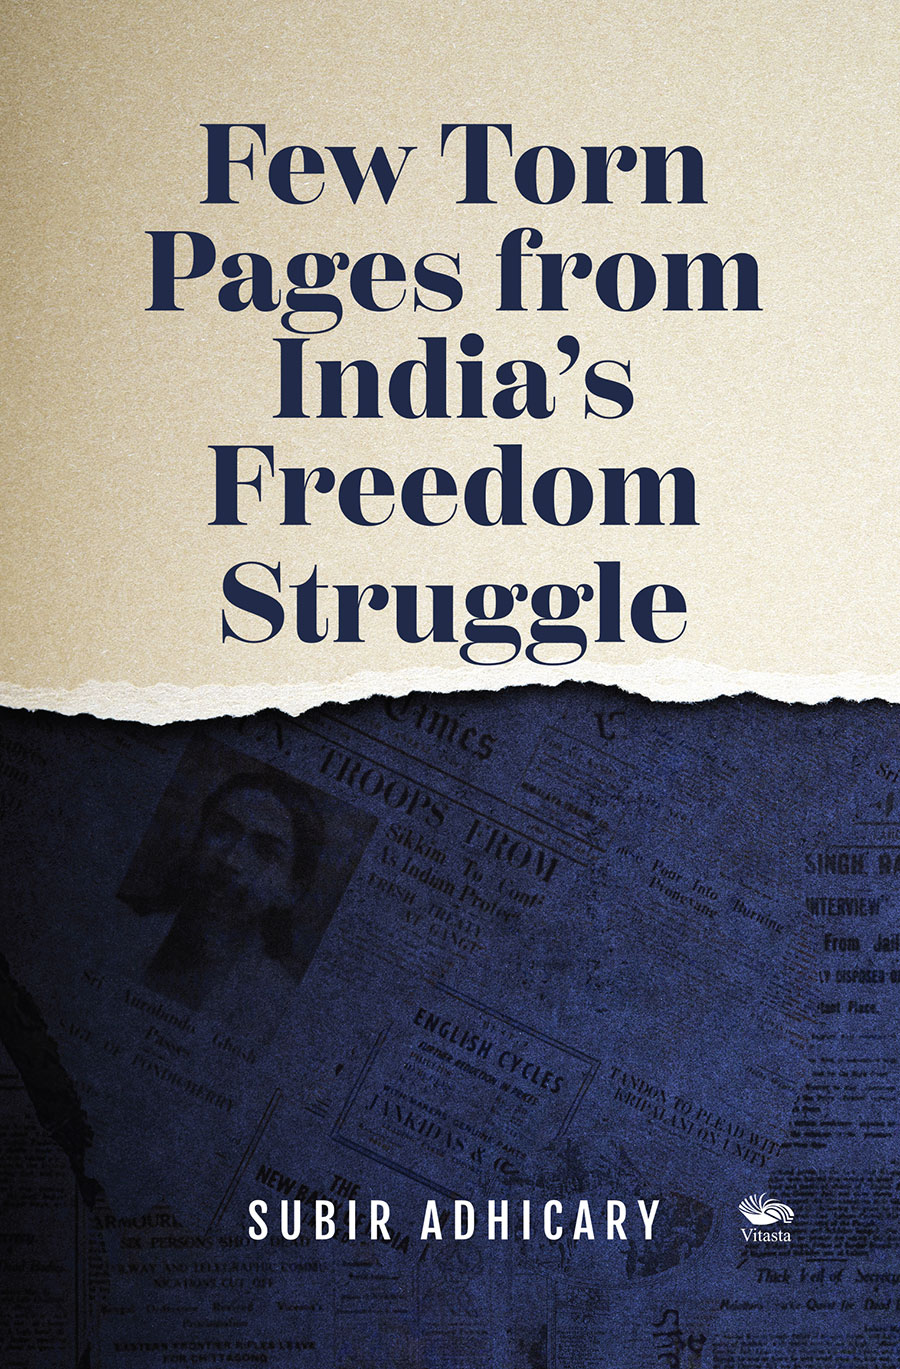 Few Torn Pages from India’s Freedom Struggle